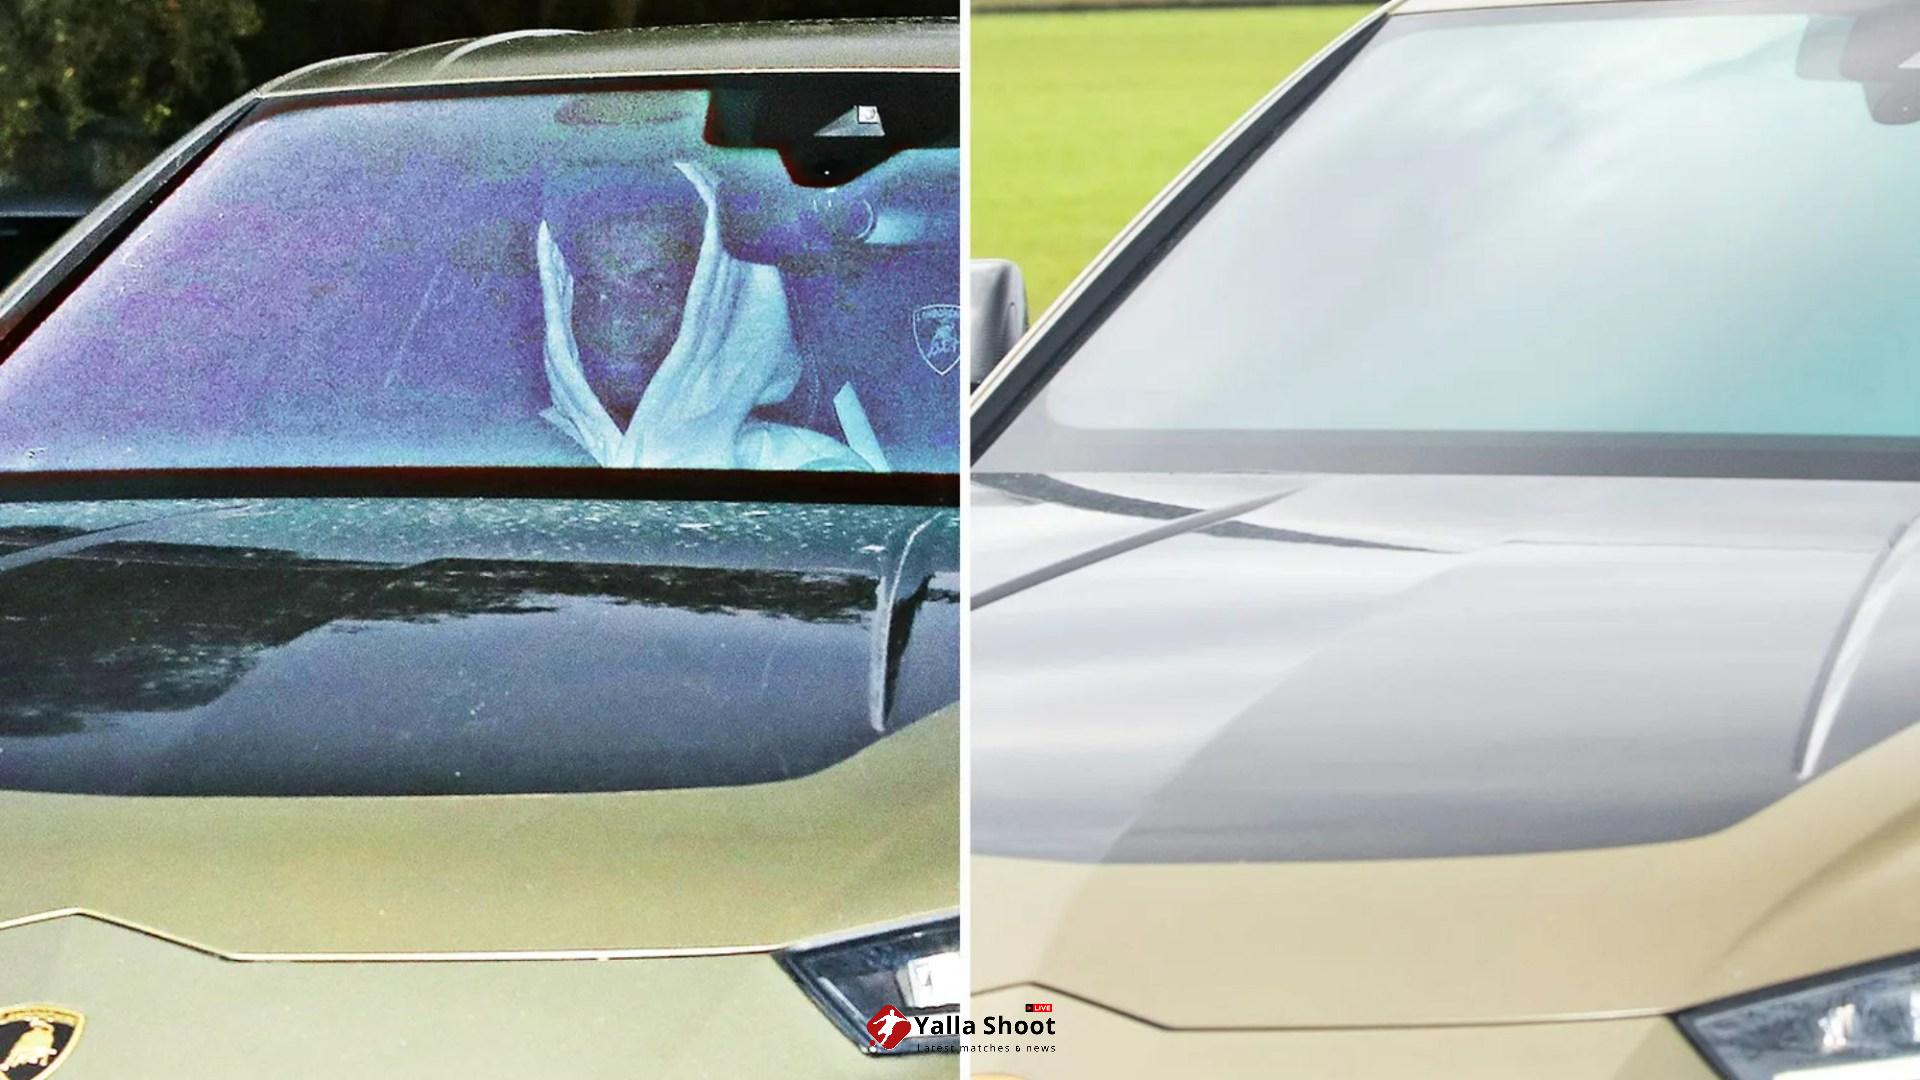 Marcus Rashford arrives at Man Utd training with newly-tinted windscreen on his Lamborghini after Belfast bender